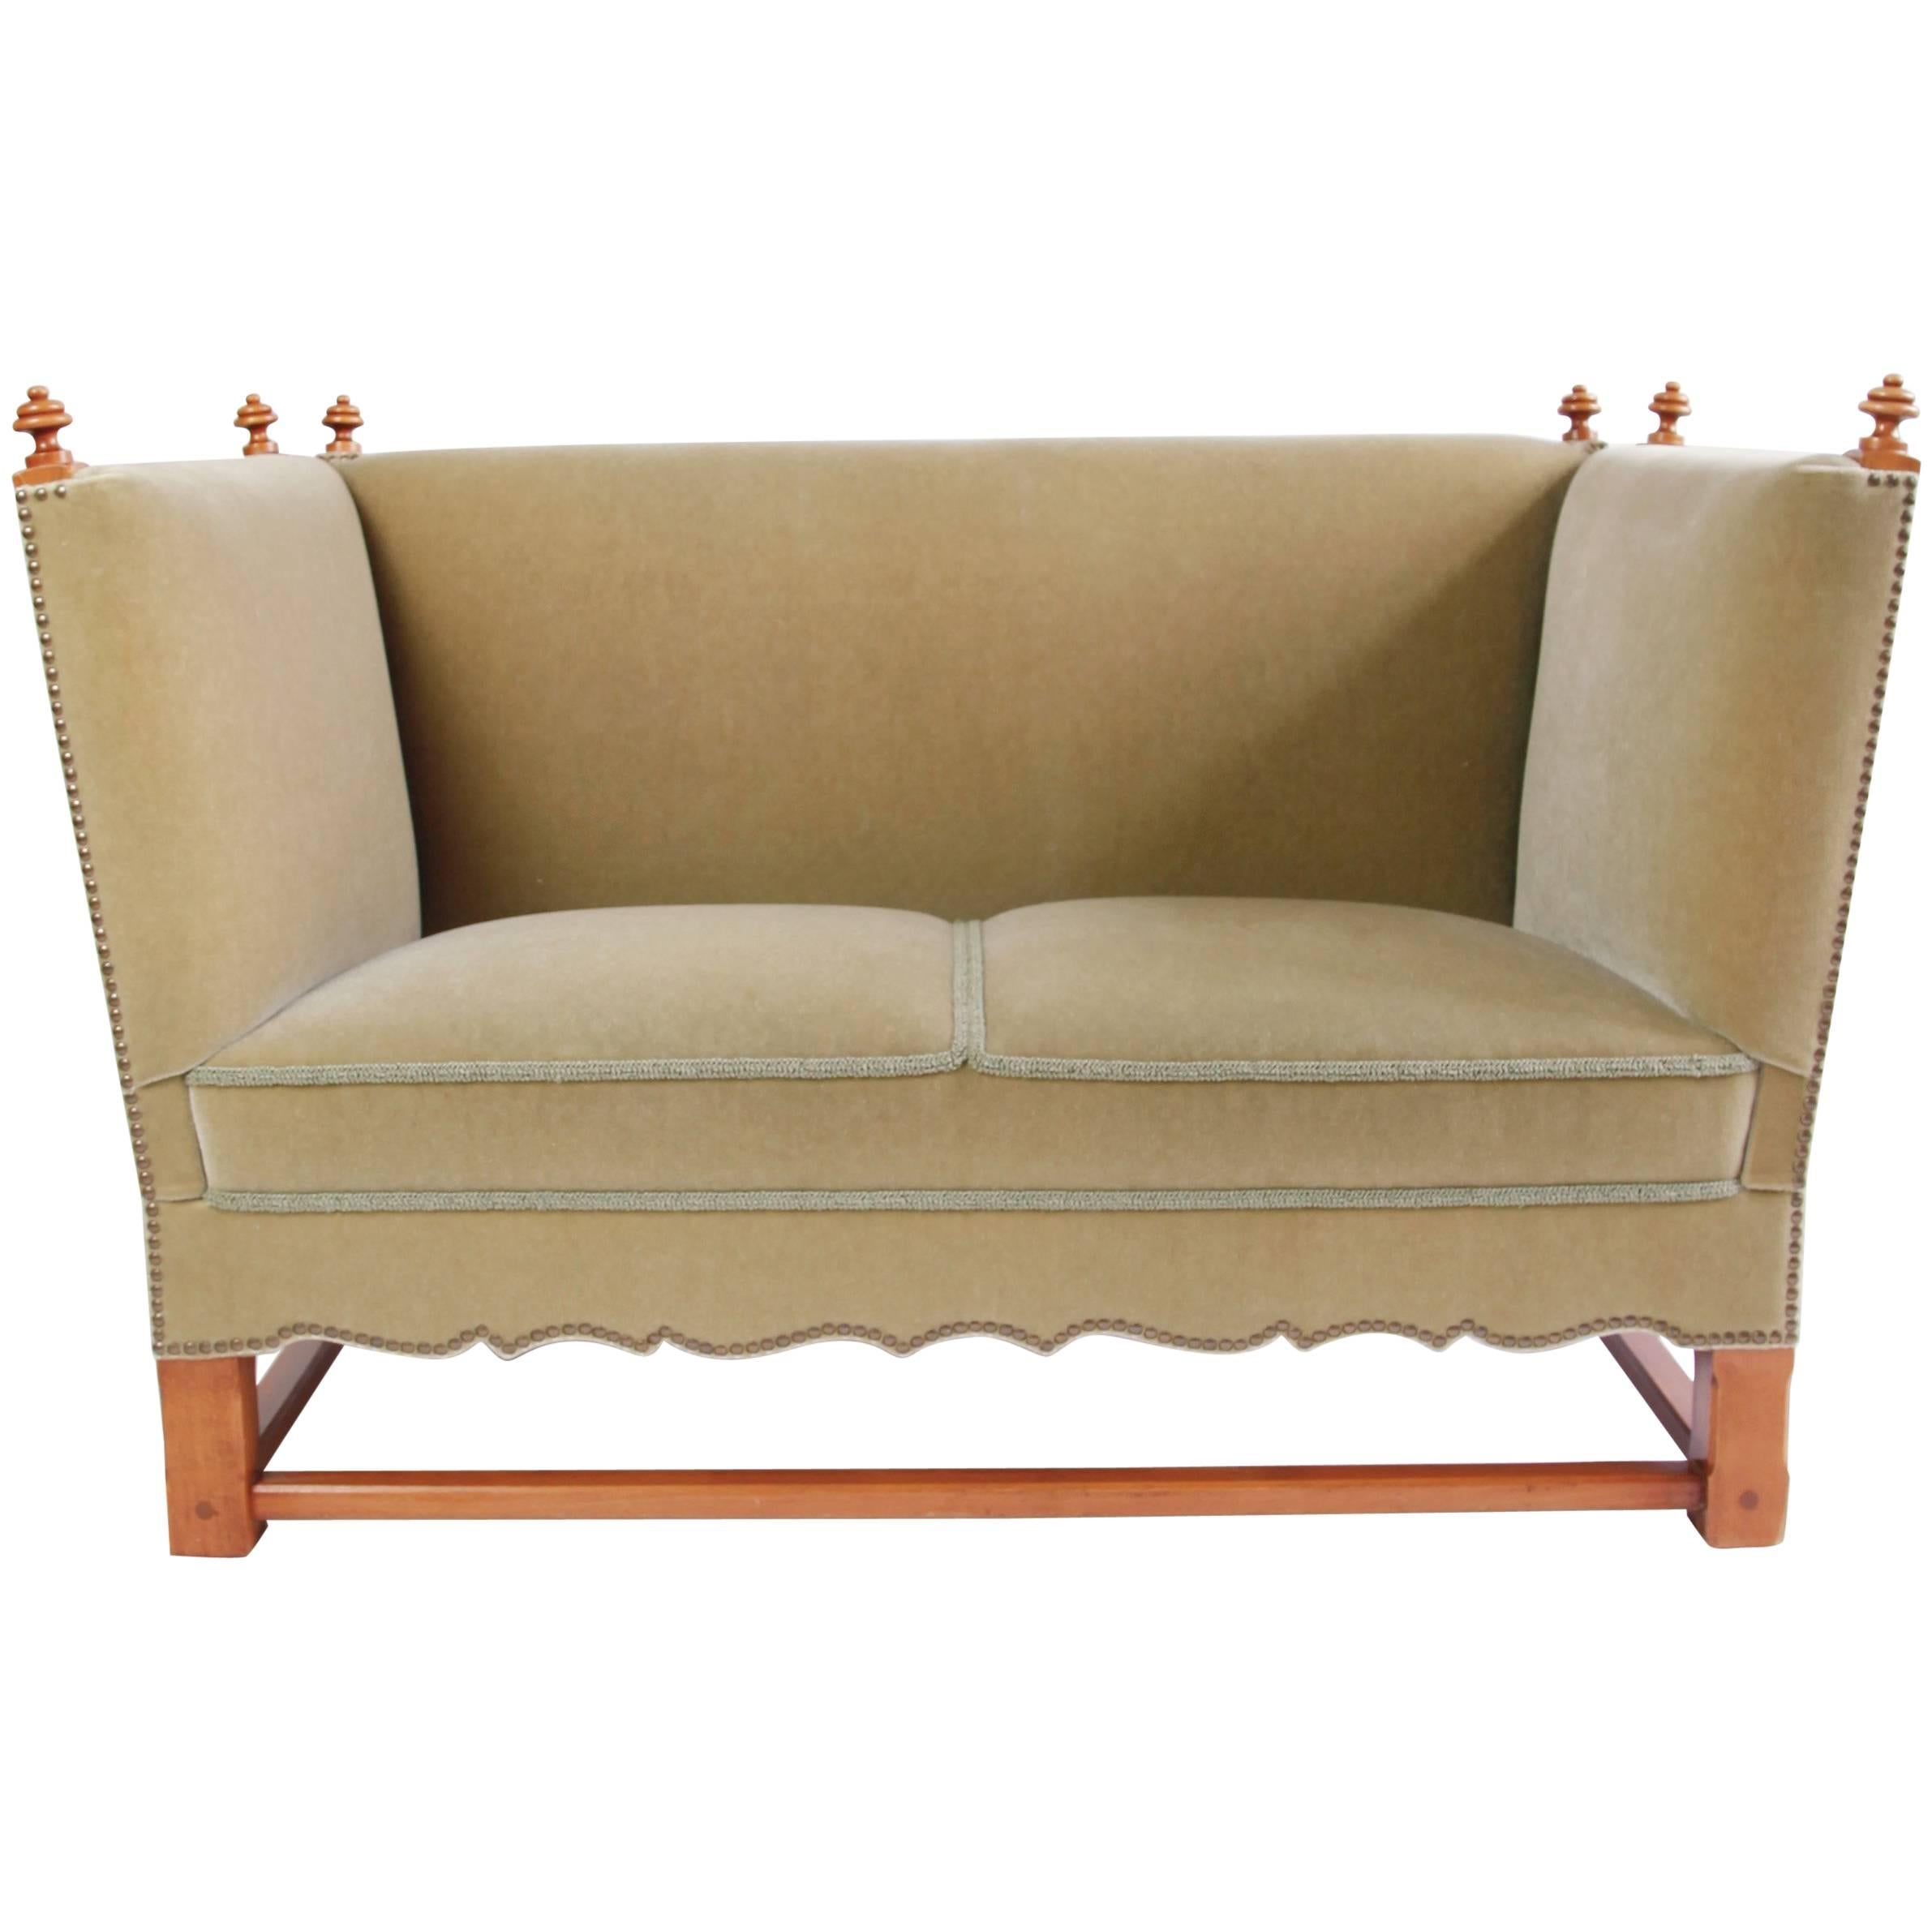 Rare Mohair Settee from "The Spanish Set" by Elias Barup